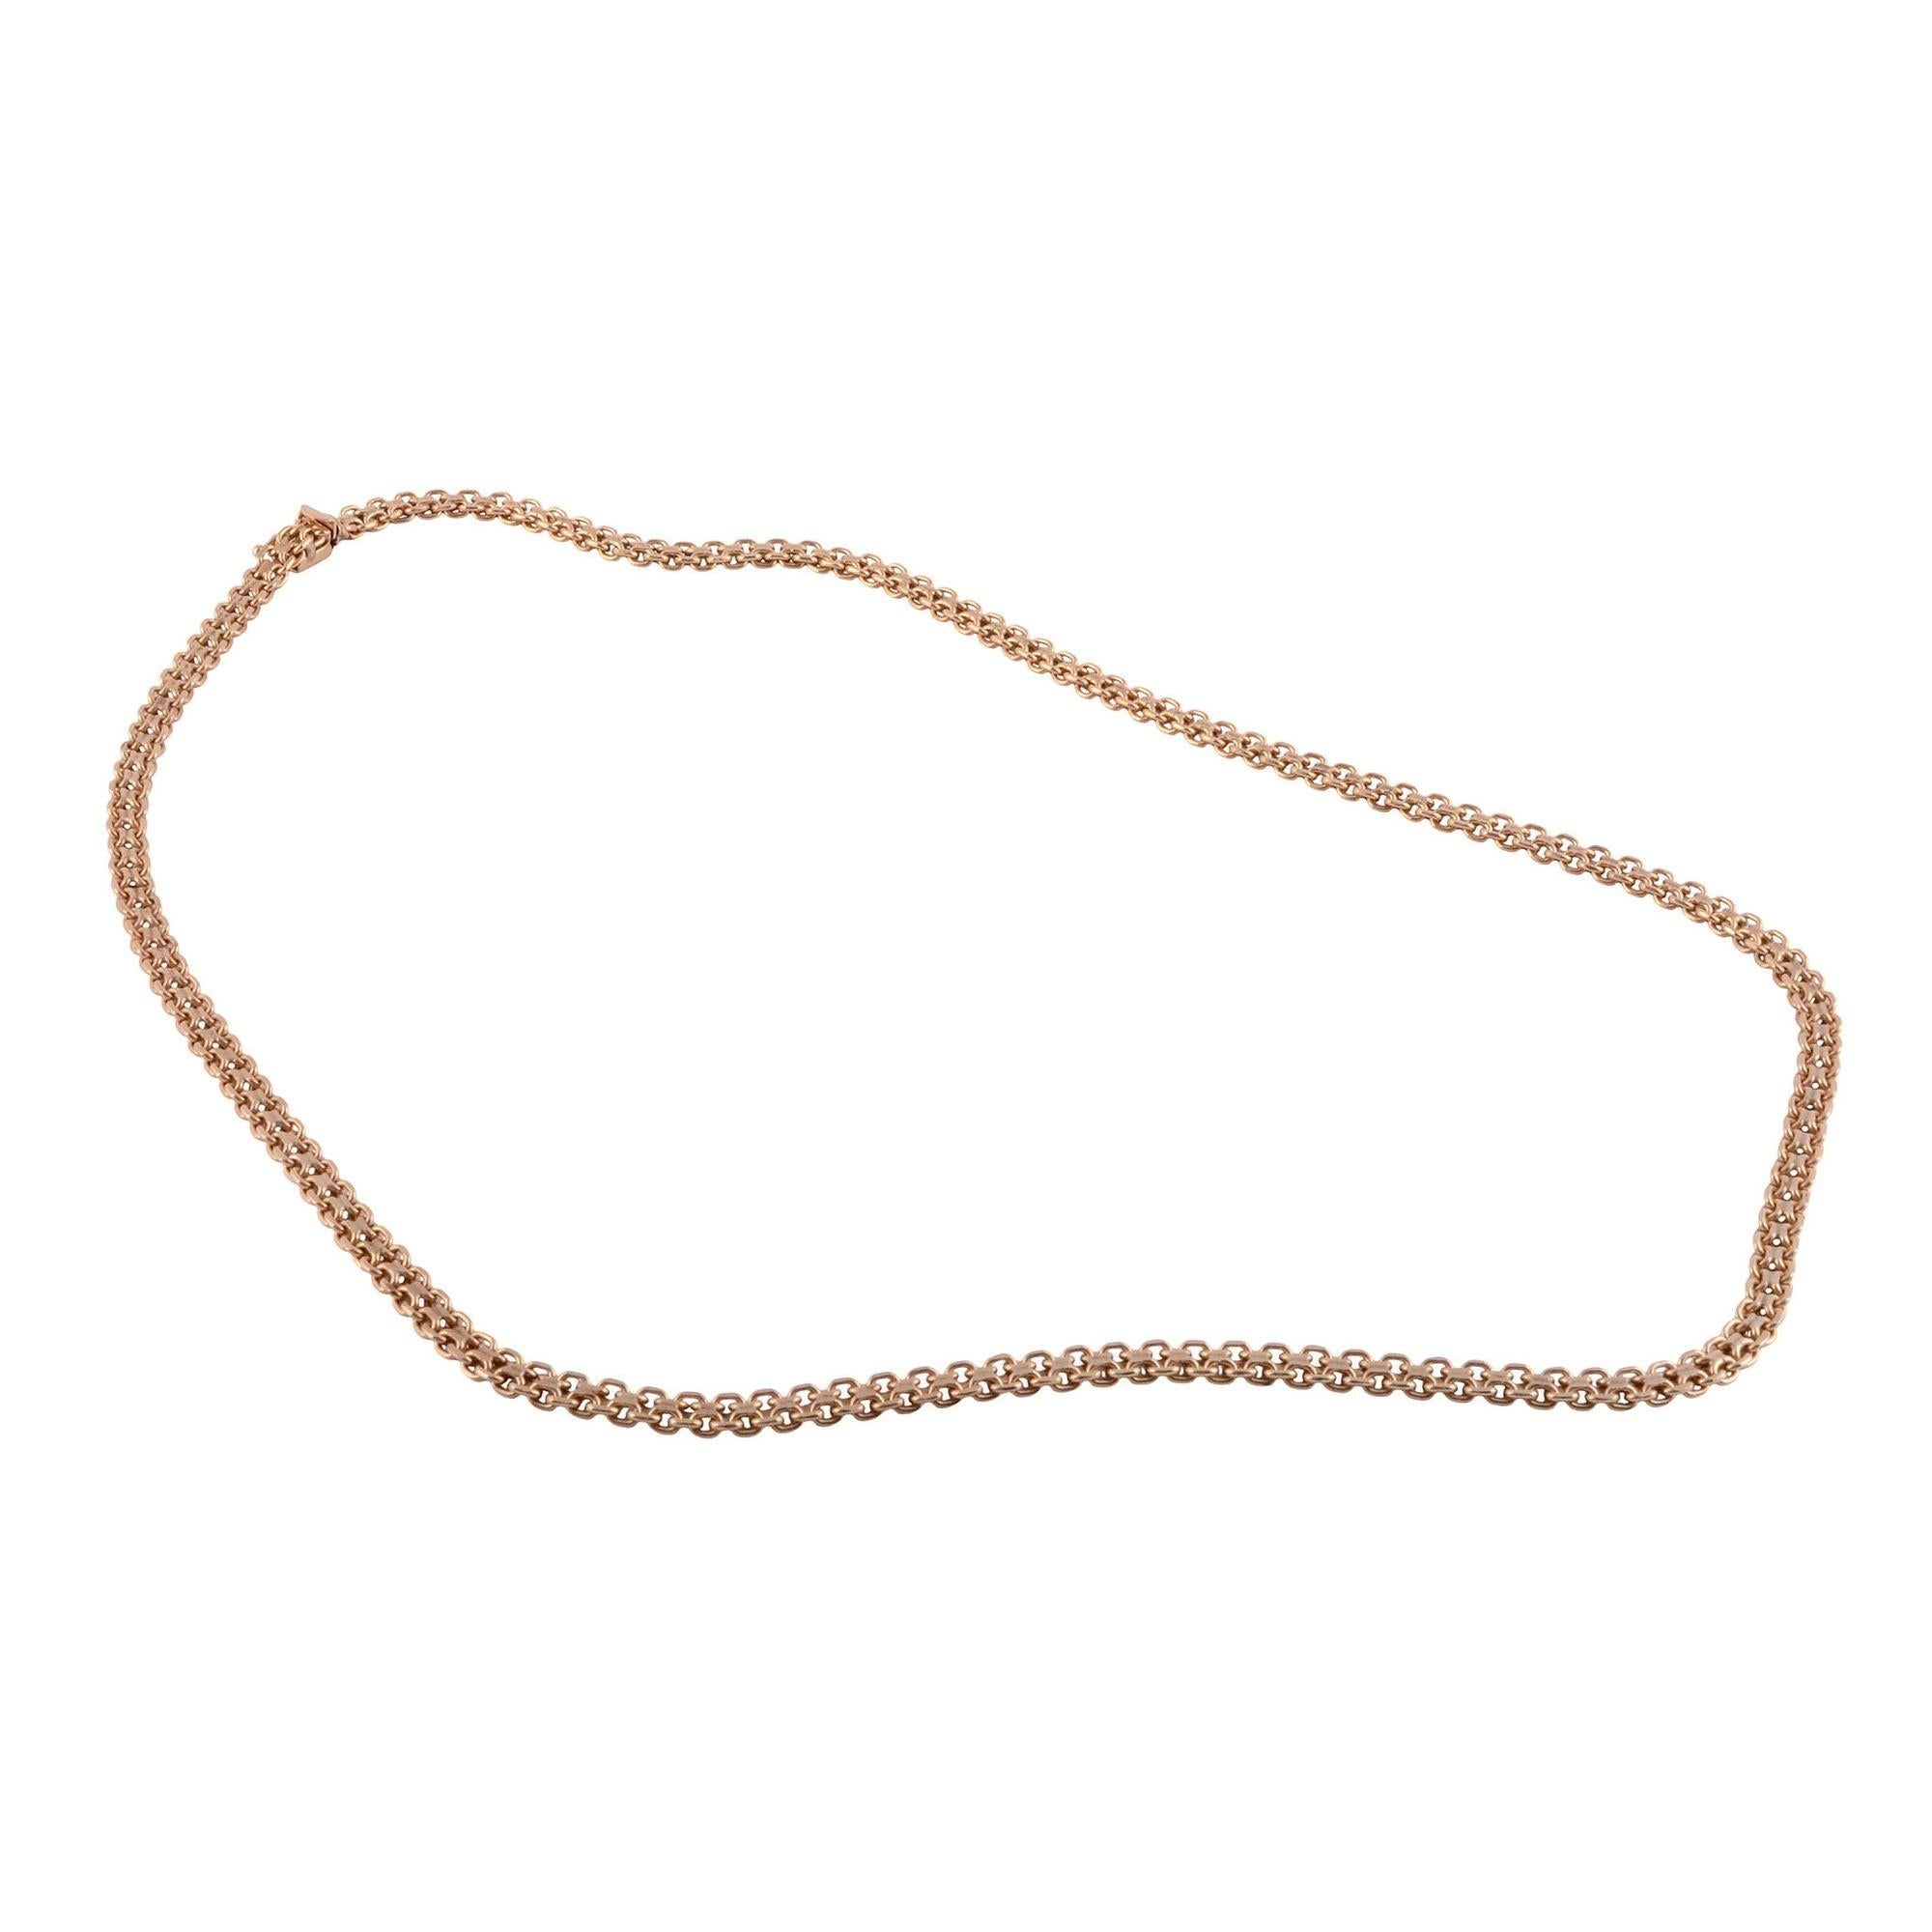 Estate 14K yellow gold heavy chain. This heavy chain with interesting links is crafted in 14 karat yellow gold. The 14K chain weighs 35 grams. [KIMH 525]
 
Dimensions
 
22.5″L x 5.15mm W